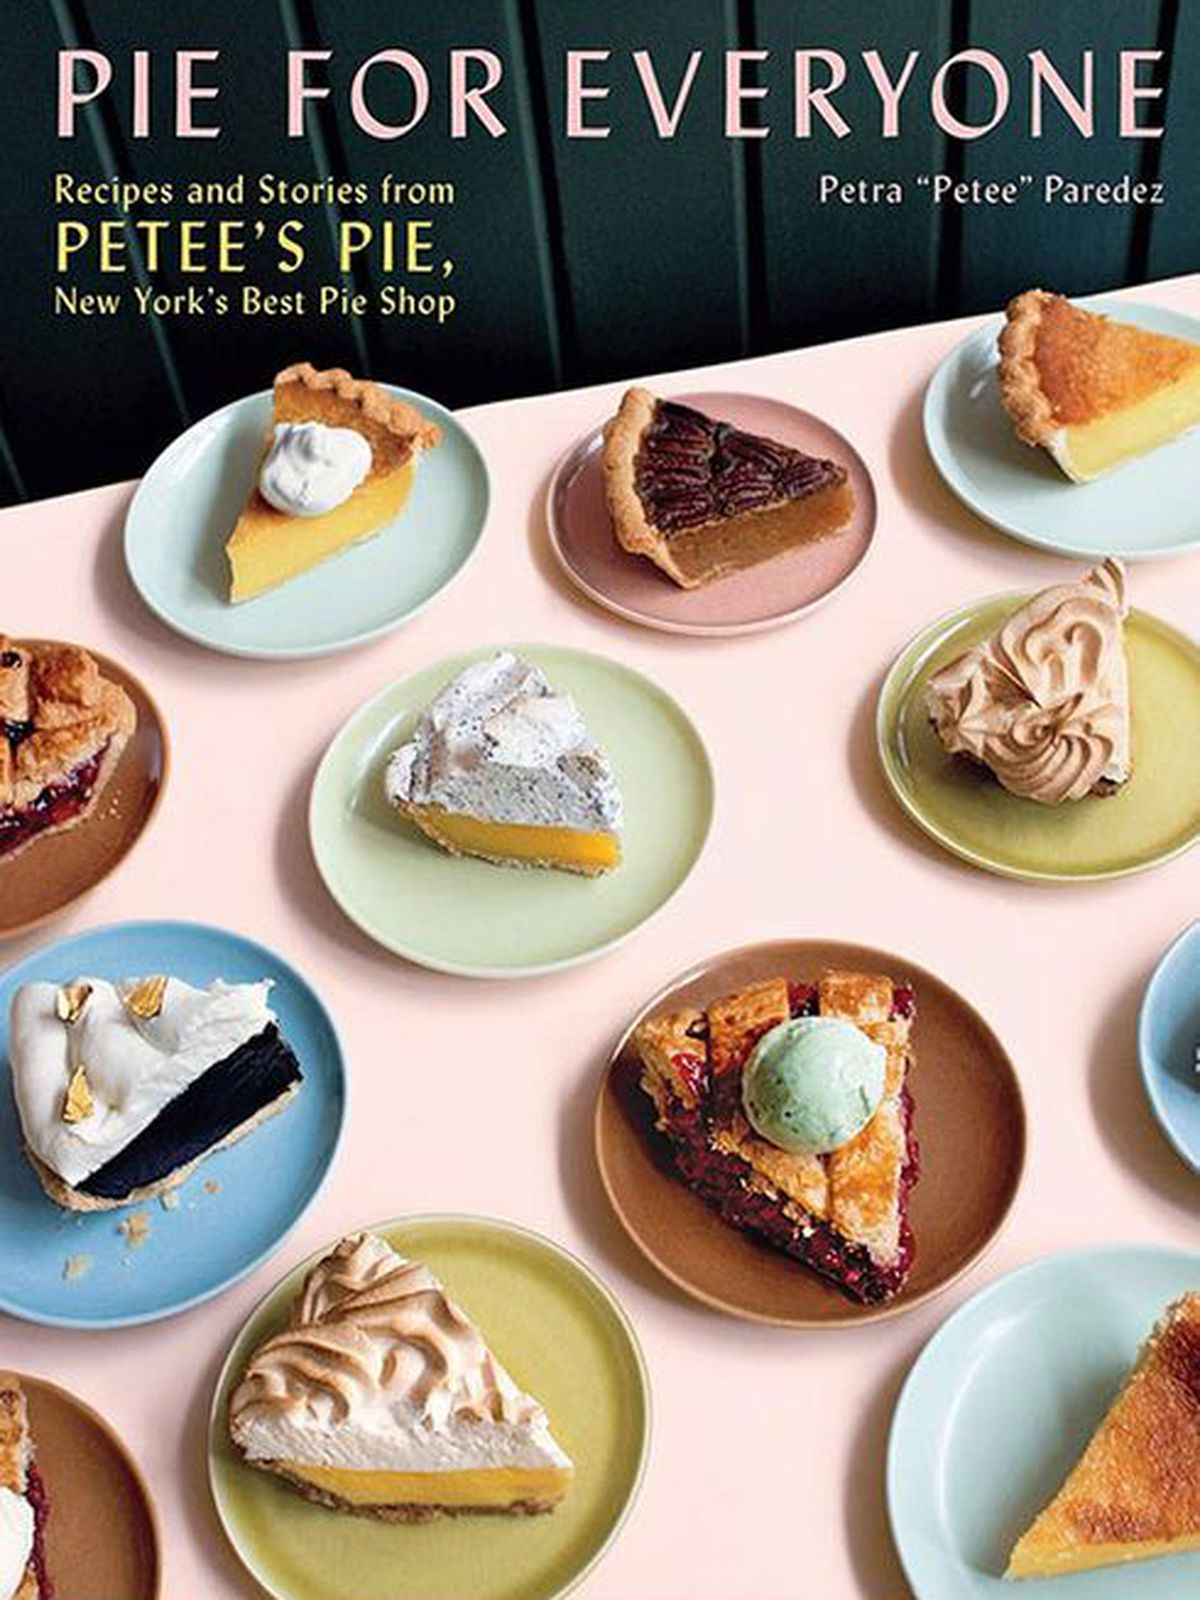 Cover of “Pie for Everyone.”